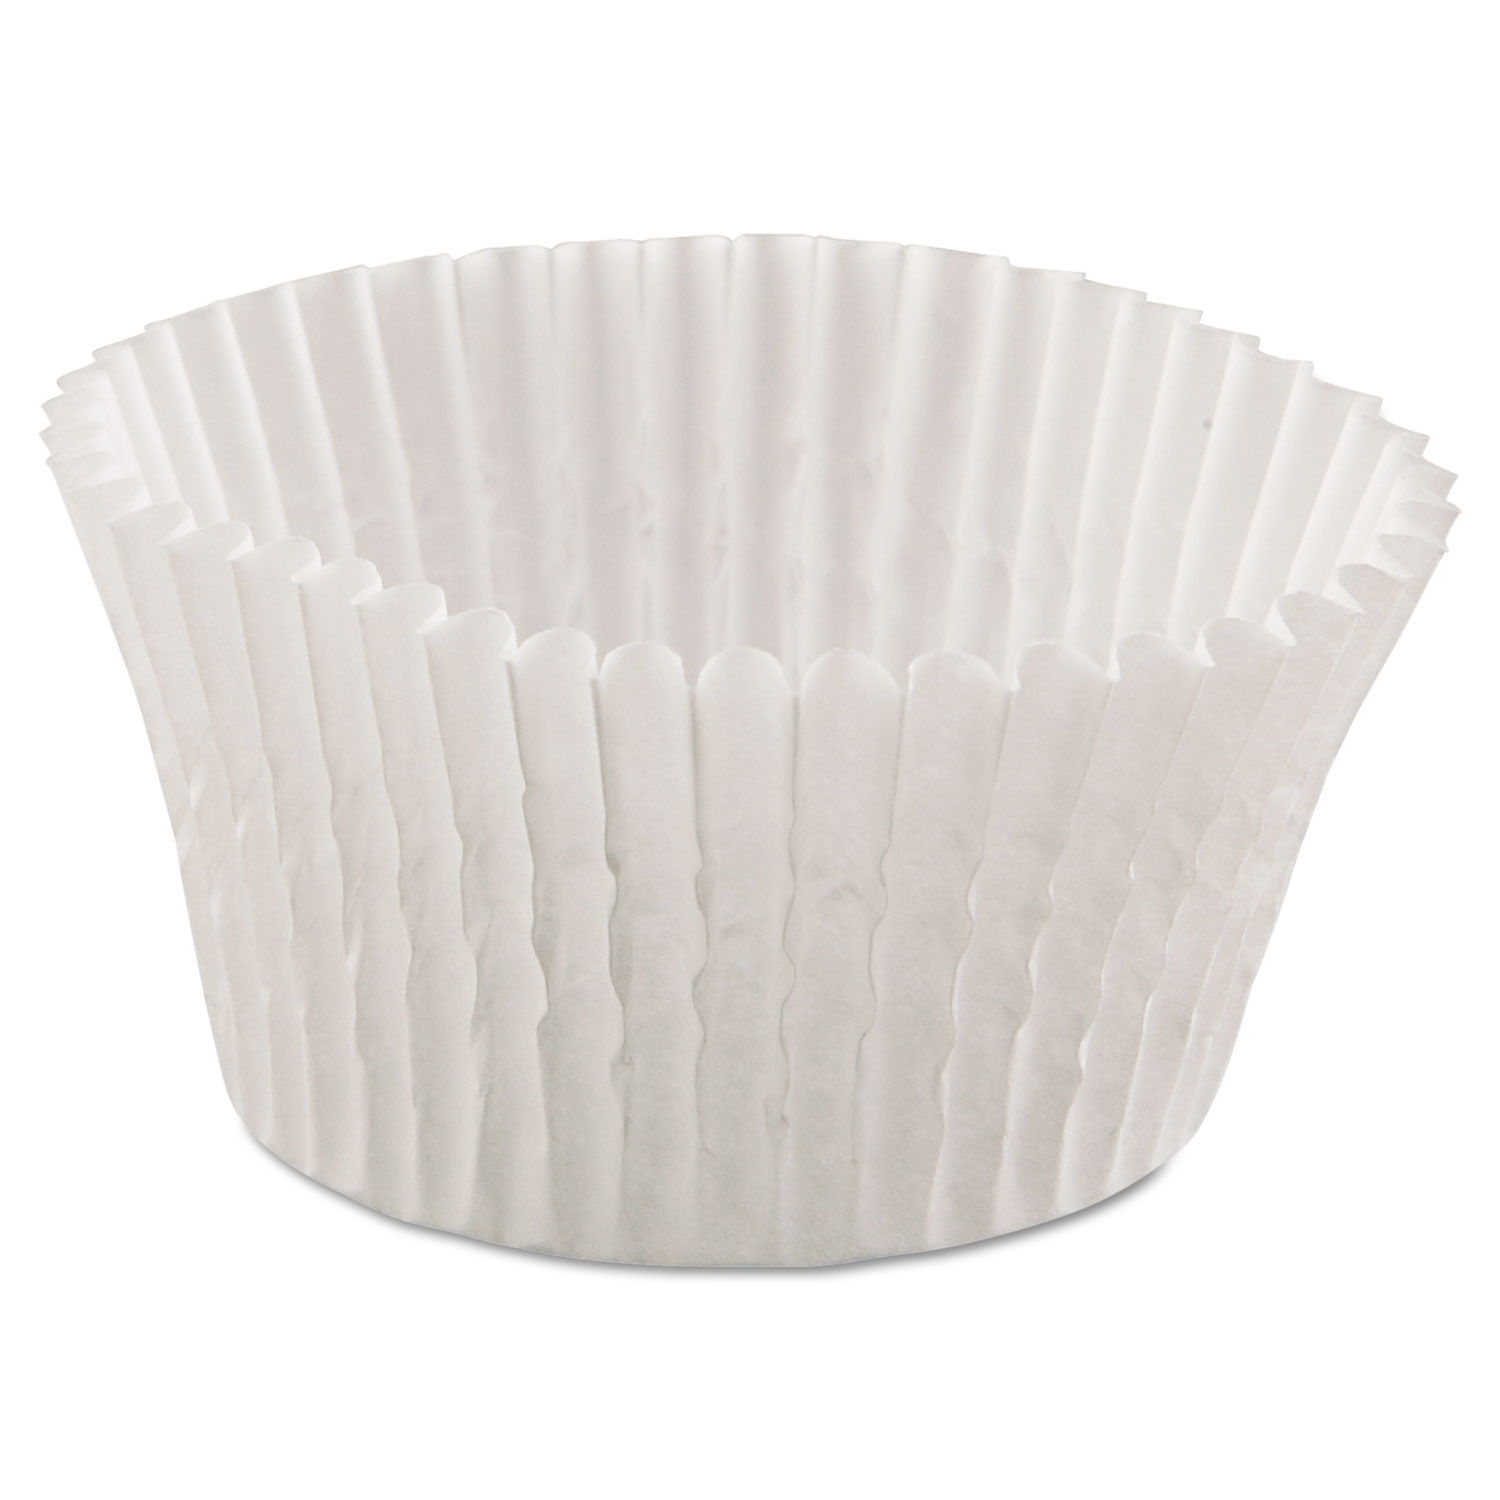 Pastry Depot White Cupcake Liner - 2 x 1.25 (500 ct)